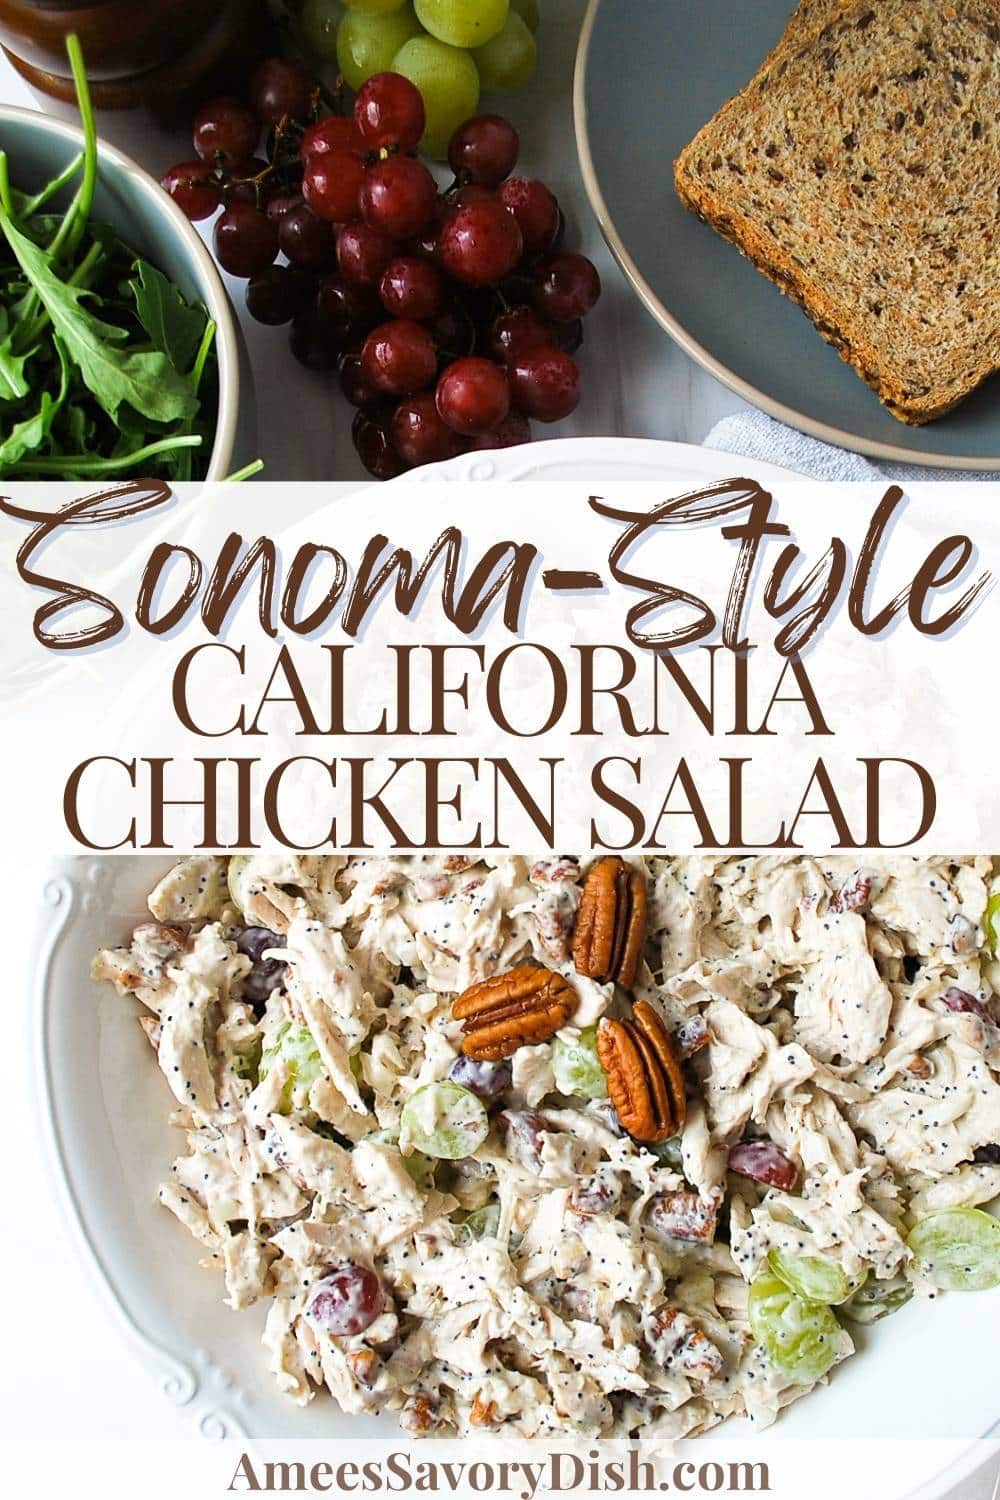 A Sonoma-style cold, creamy chicken salad loaded with succulent grapes, finely diced onion, toasted nuts, and a medley of sweet & savory flavors and seasonings. via @Ameessavorydish